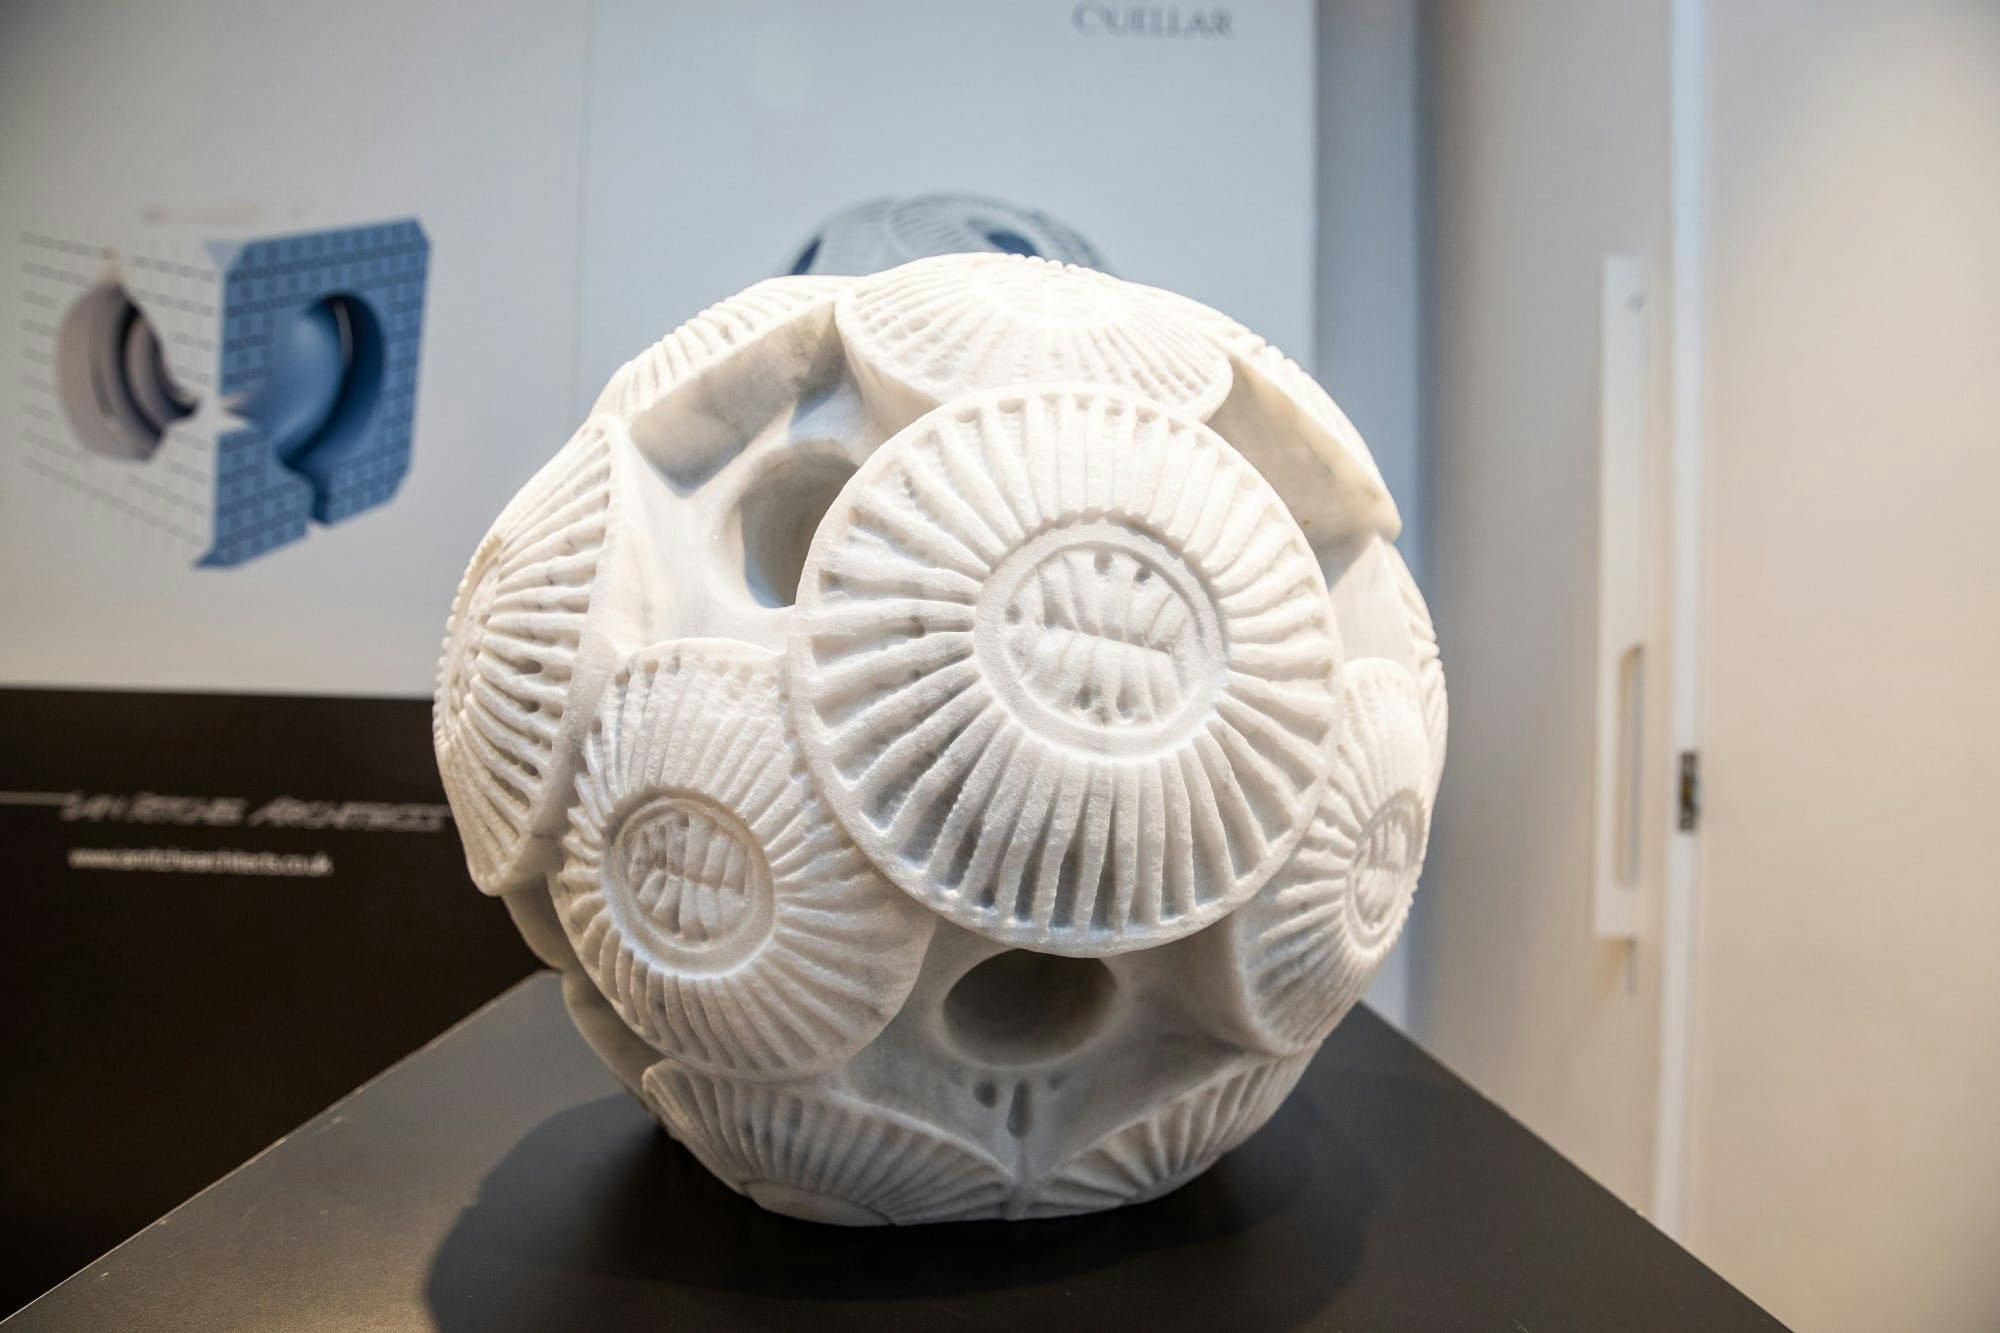 Image 38 of tonkin liu Sculpture 4 in Cosentino Announces the Winners of its Carved in Stone Competition - Cosentino